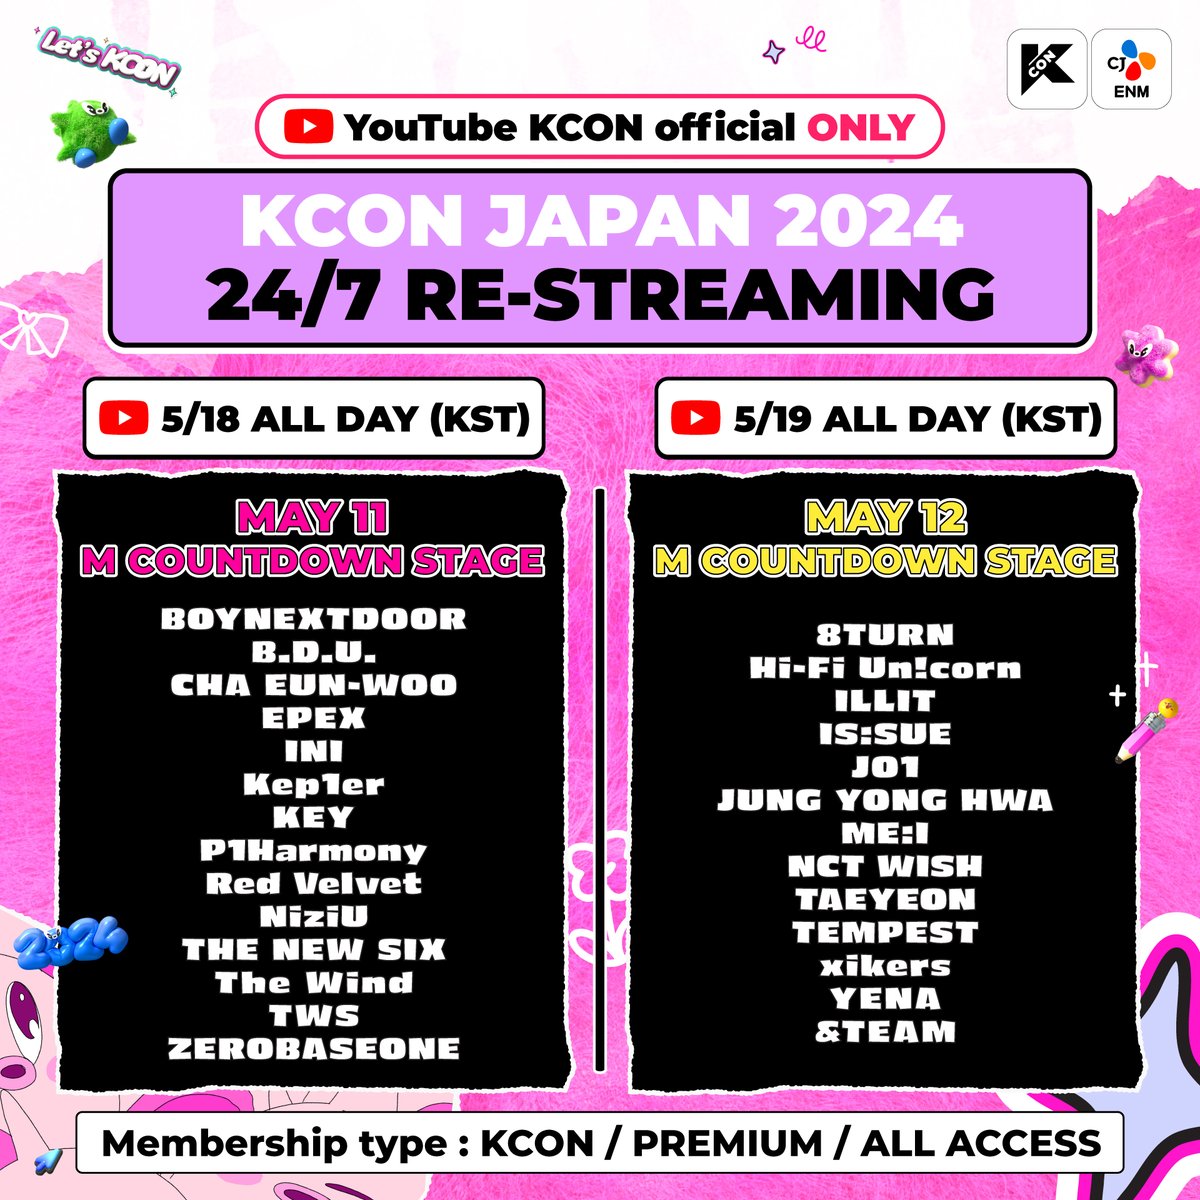 [#KCONJAPAN2024] 🔁24/7 SHOW RE-STREAMING DAY!📺 📢 Gather up KCON official membership subscribers! KCON JAPAN 2024 SHOW RE-STREAMING schedule is here! (Membership type: KCON / PREMIUM / ALL ACCESS) 👉 [KCON official] youtube.com/kcon/join ➫ MAY 11 M COUNTDOWN STAGE: